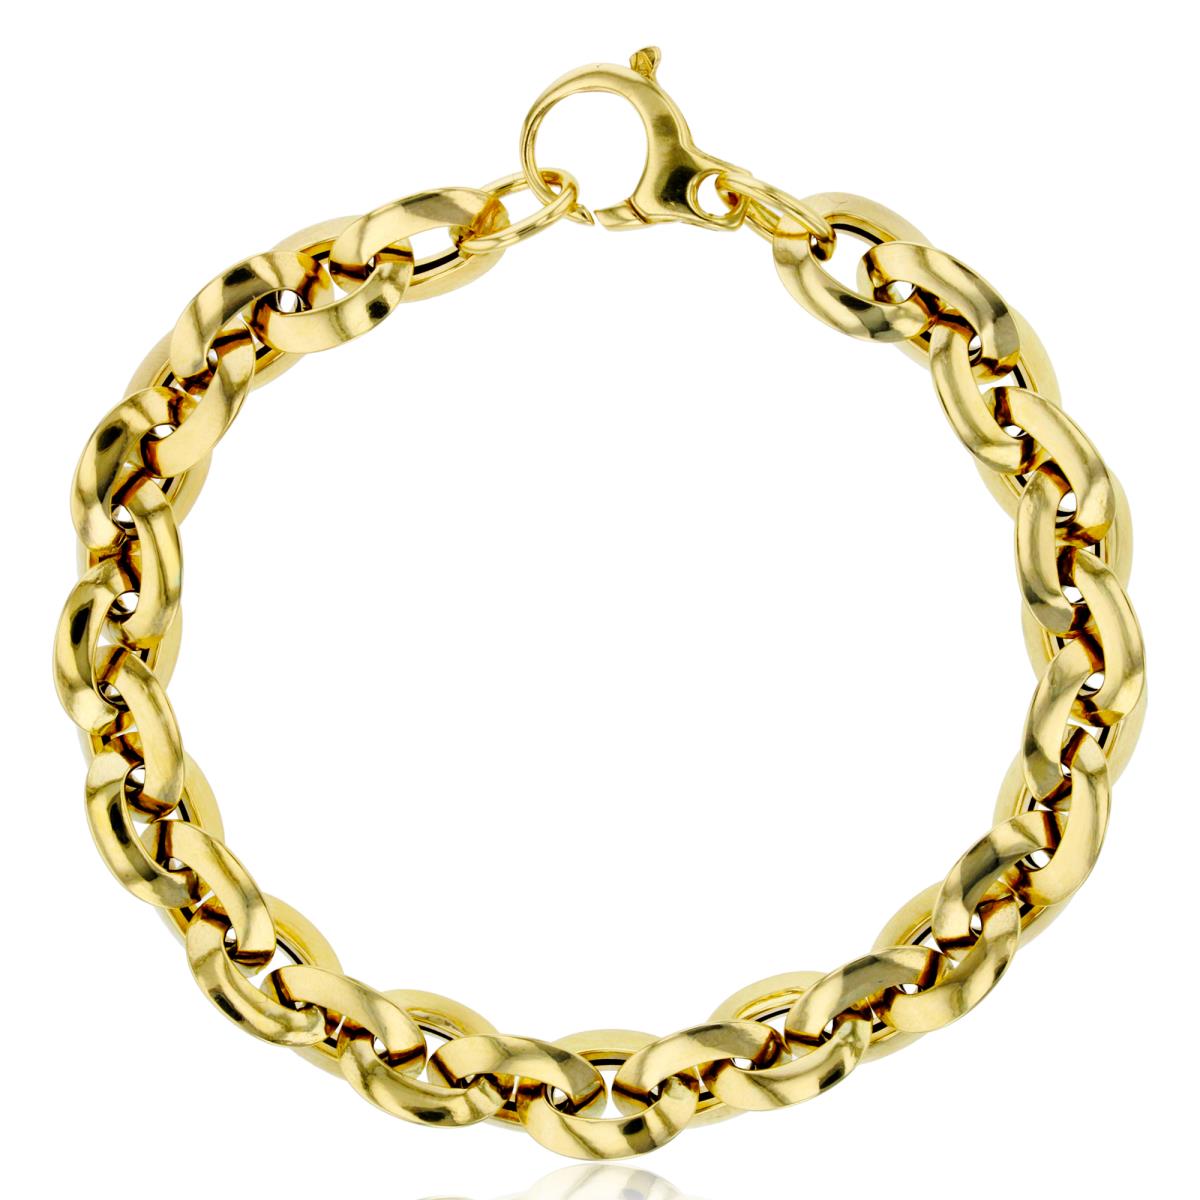 10K Yellow Gold Polished Fancy Cable 7.75" Bracelet